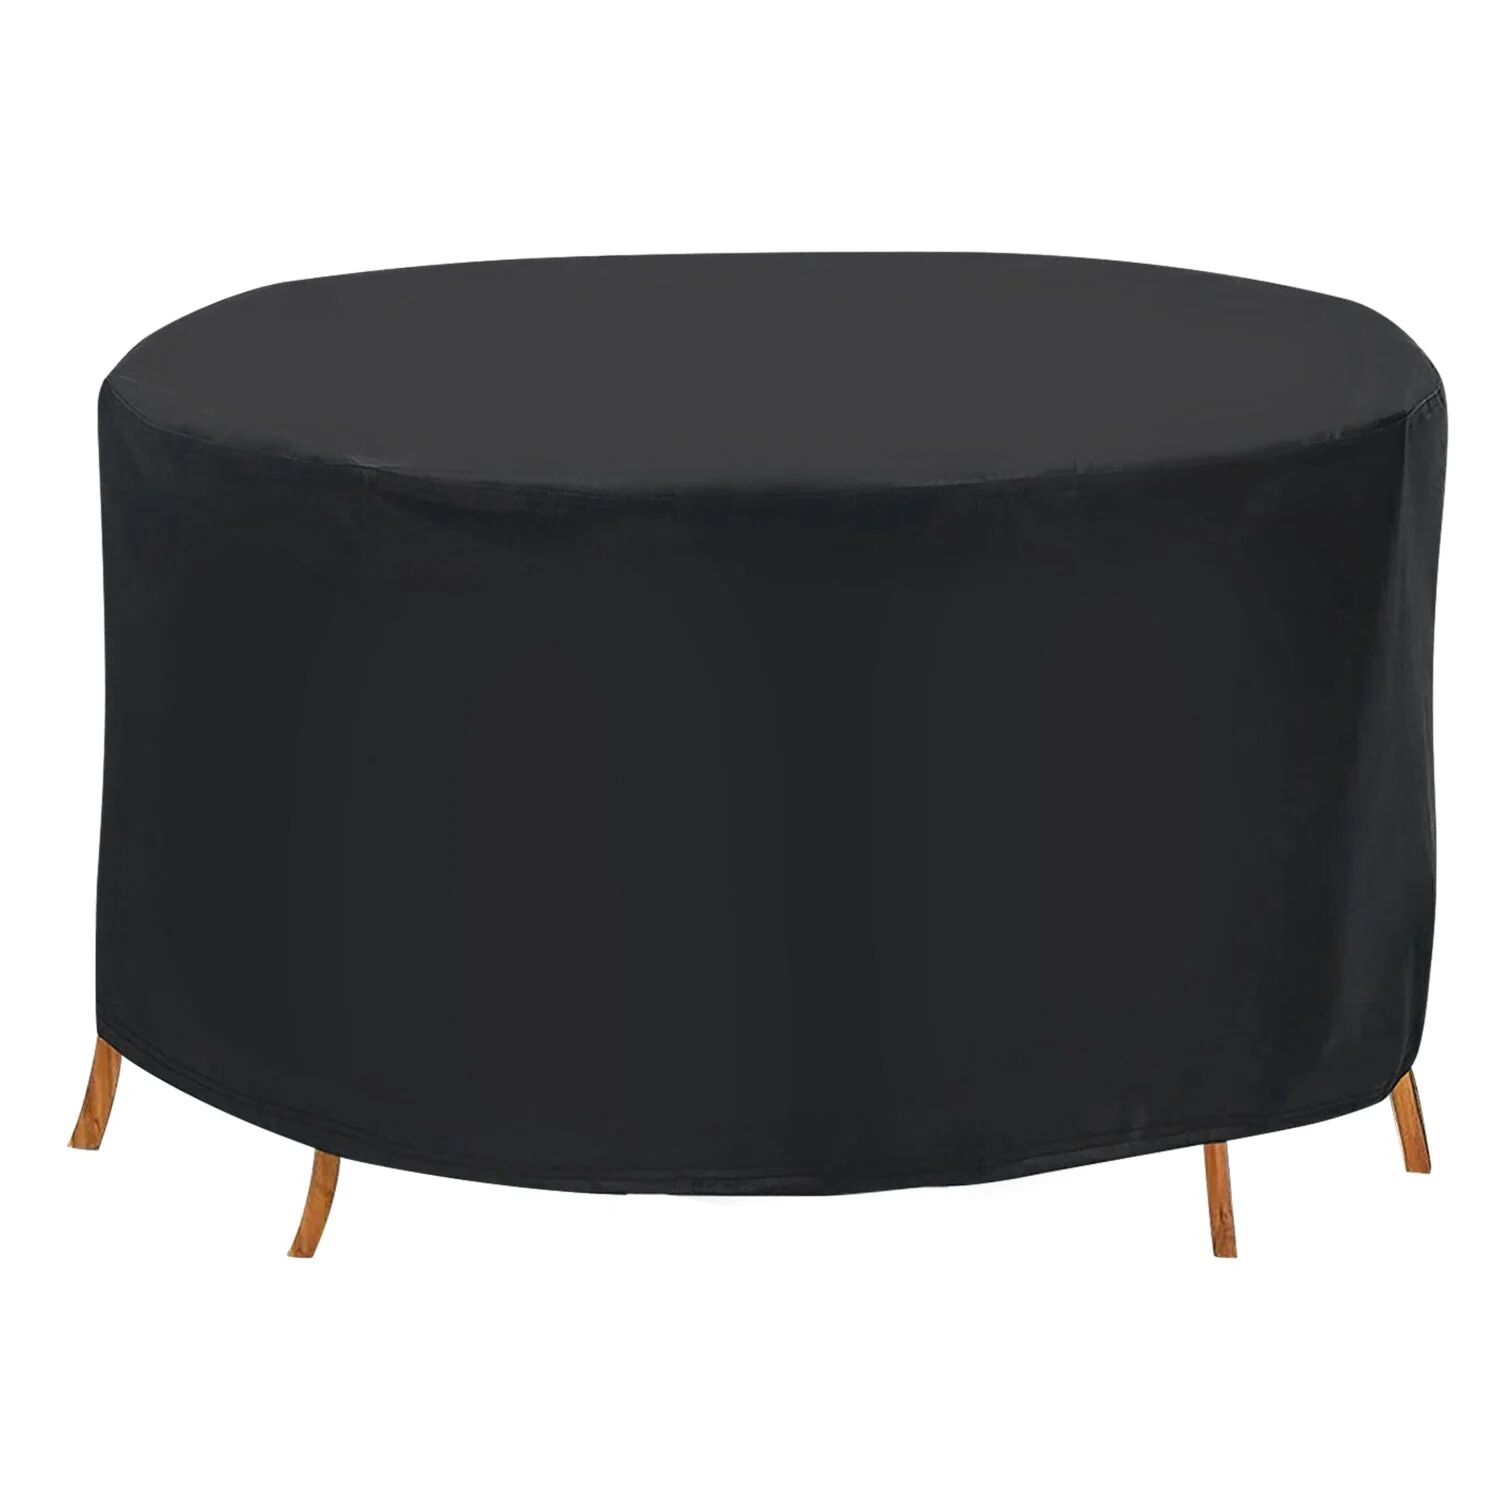 DailySale Circular Table Cover Outdoor Furniture Protector